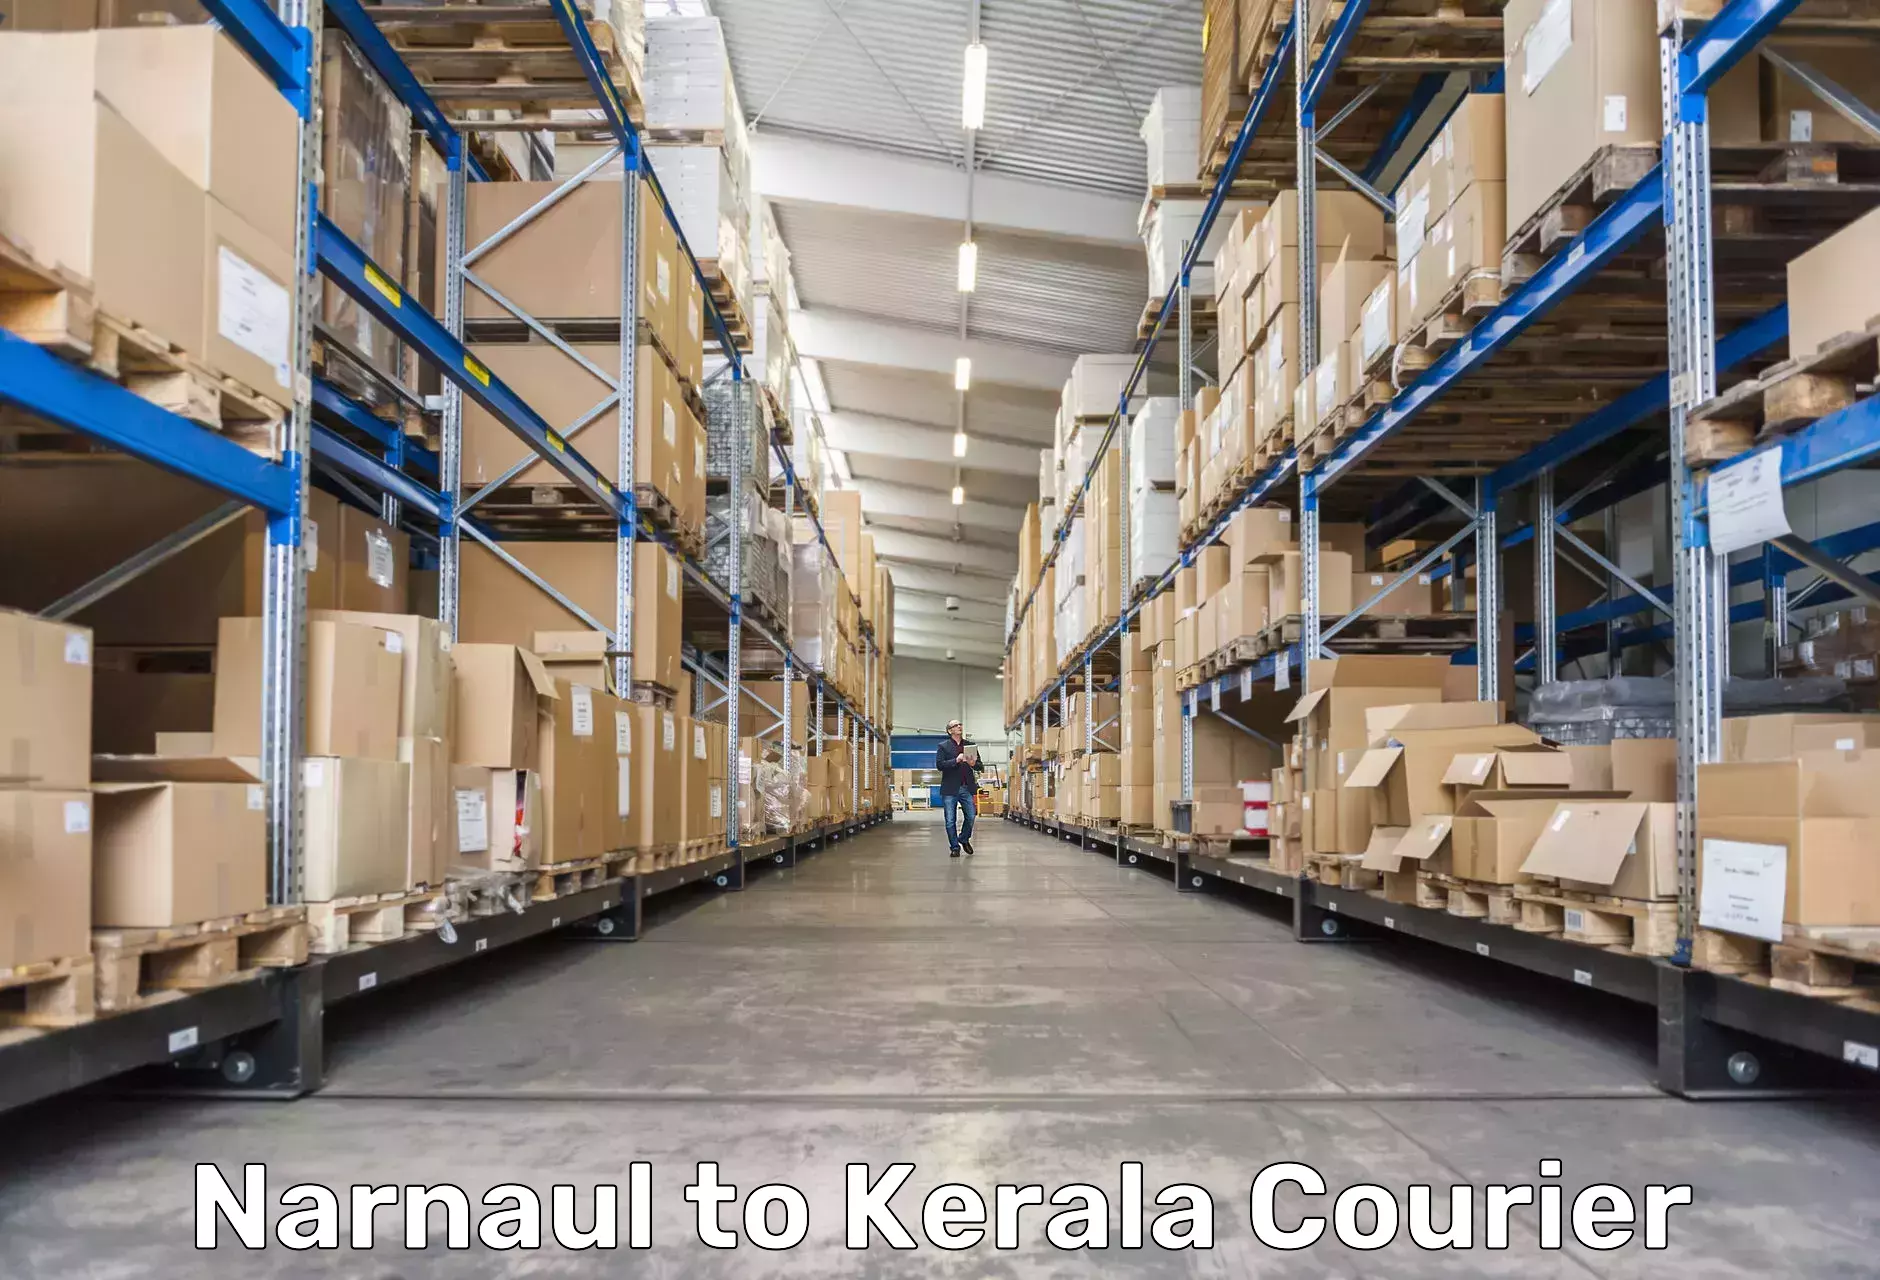 Express delivery capabilities Narnaul to Kerala